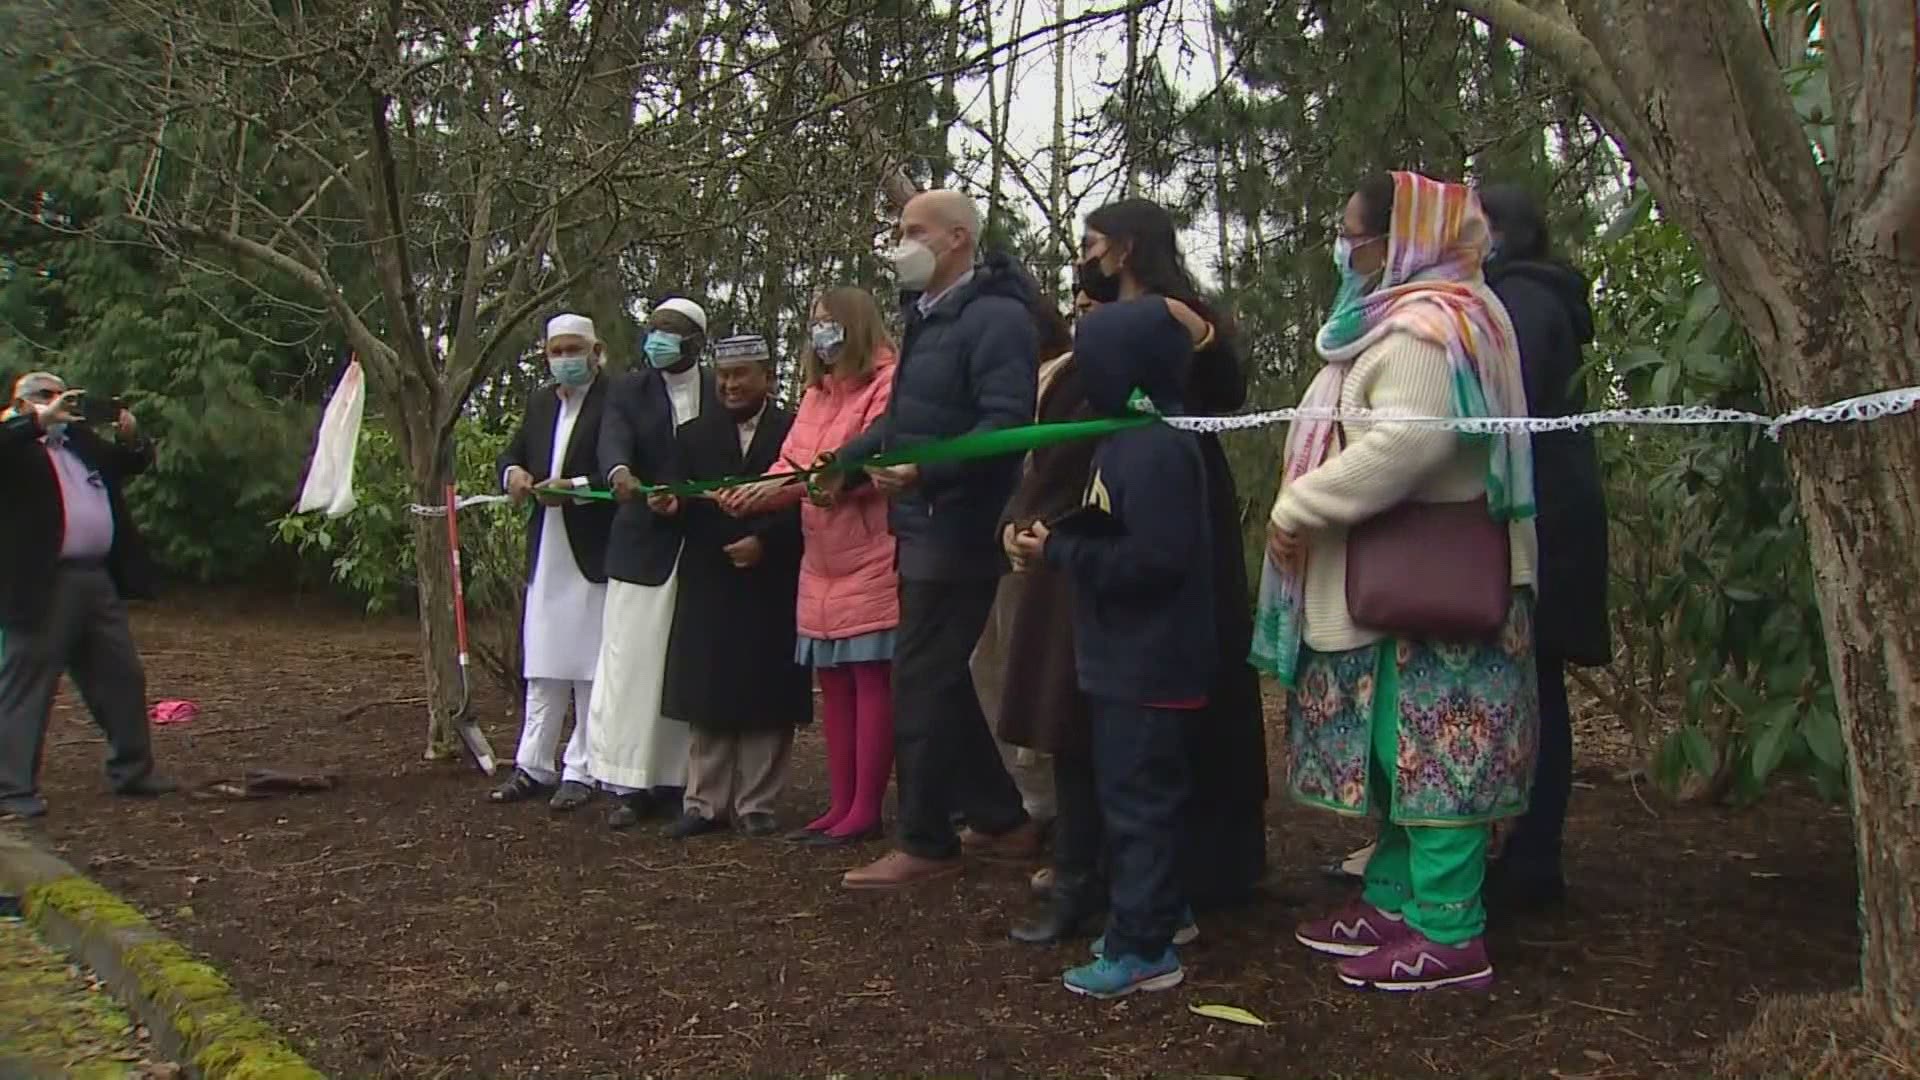 The Muslim community in Snohomish County, along with elected and religious leaders, finally broke ground on the first mosque in Mukilteo after previous backlash.